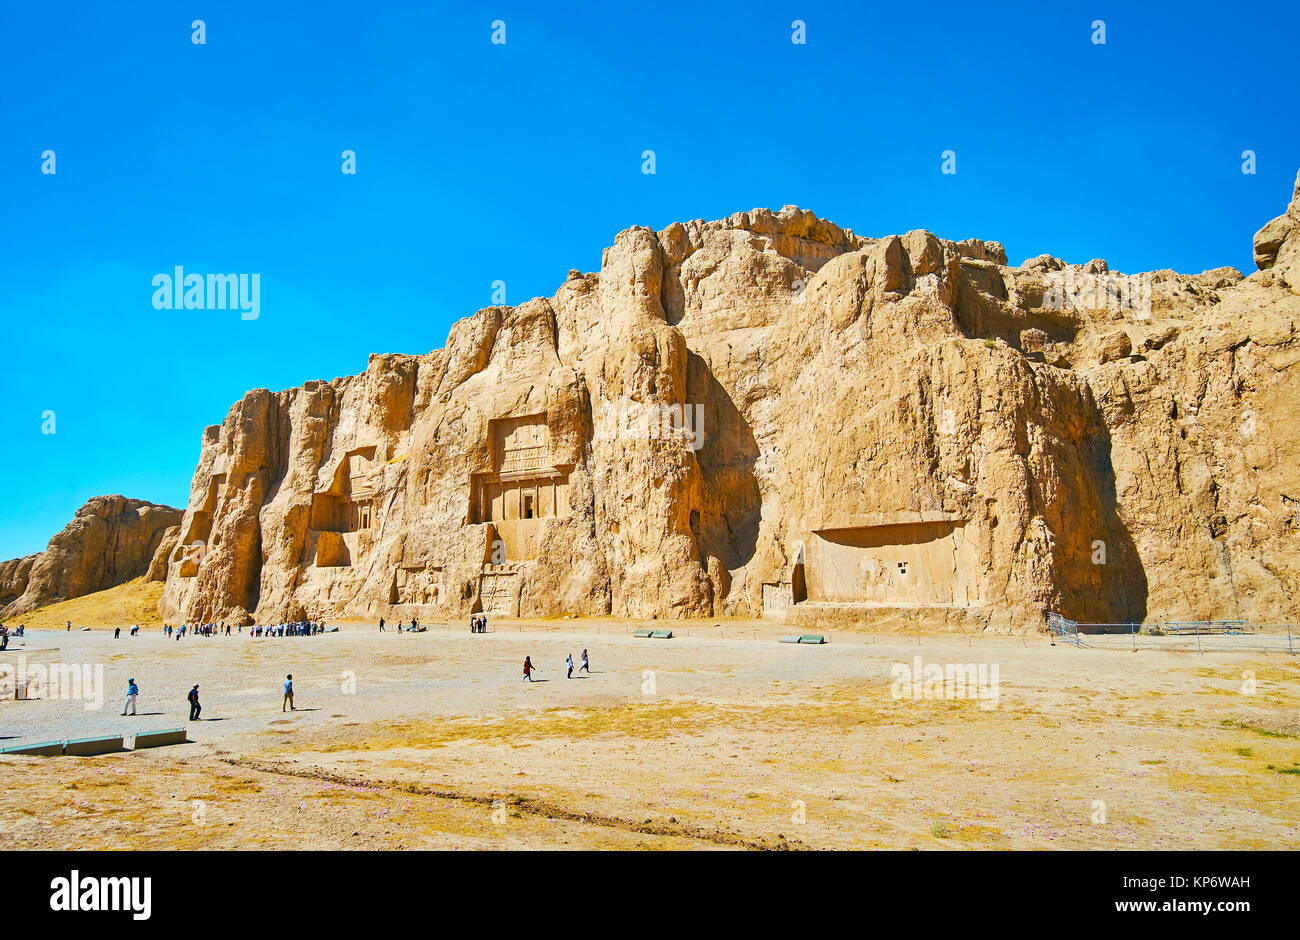 NAQSH-E RUSTAM, IRAN - OCTOBER 13, 2017: Panorama of Naqsh-e Rustam Necropolis - Hossein Mount with mausoleums on its front, on October 13 in Naqsh-e  Stock Photo